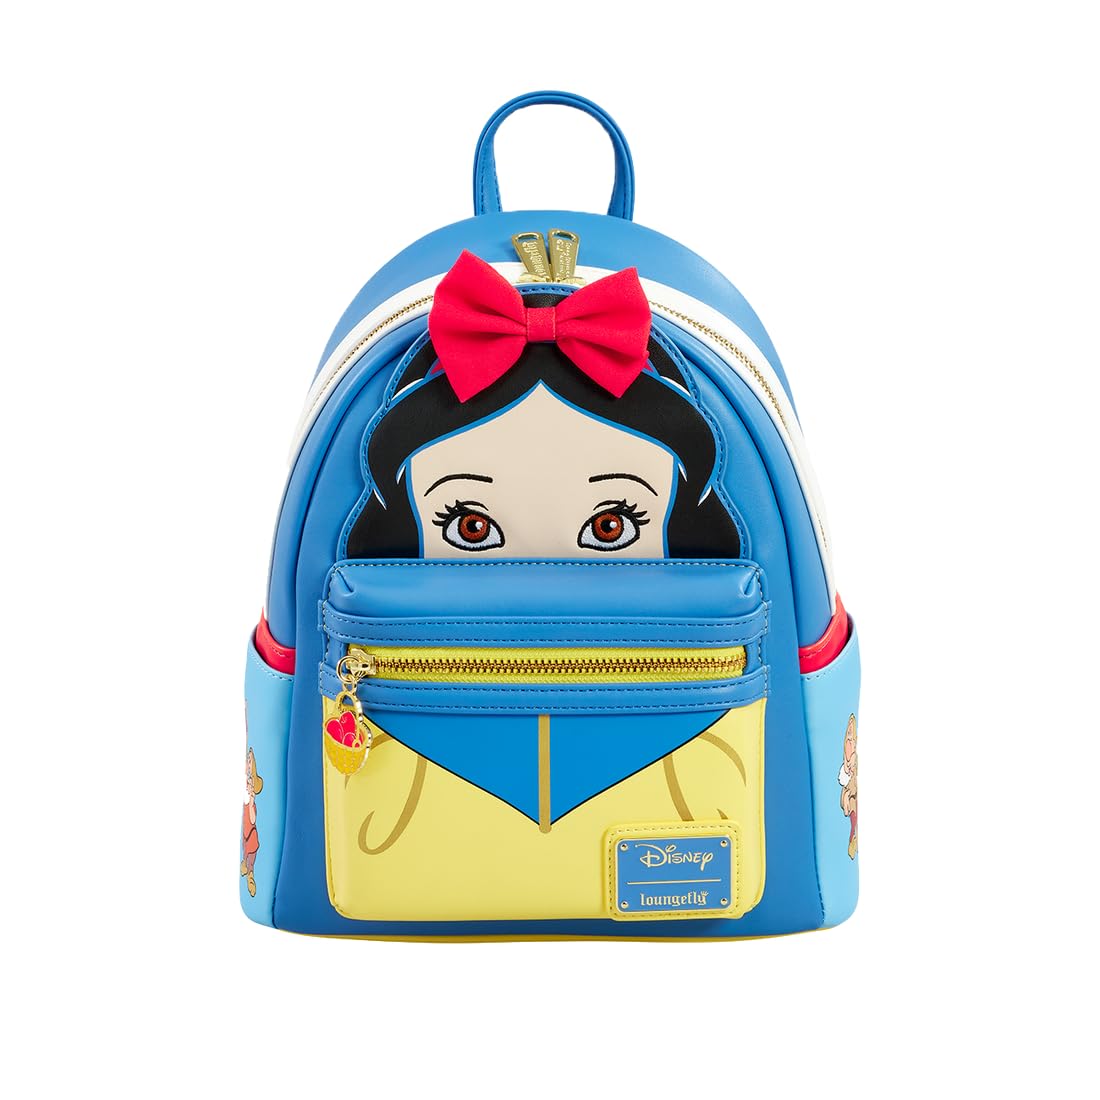 Loungefly Womens Disney Snow White and the Seven Dwarfs Double Strap Shoulder Bag Purse $40 + Free Shipping